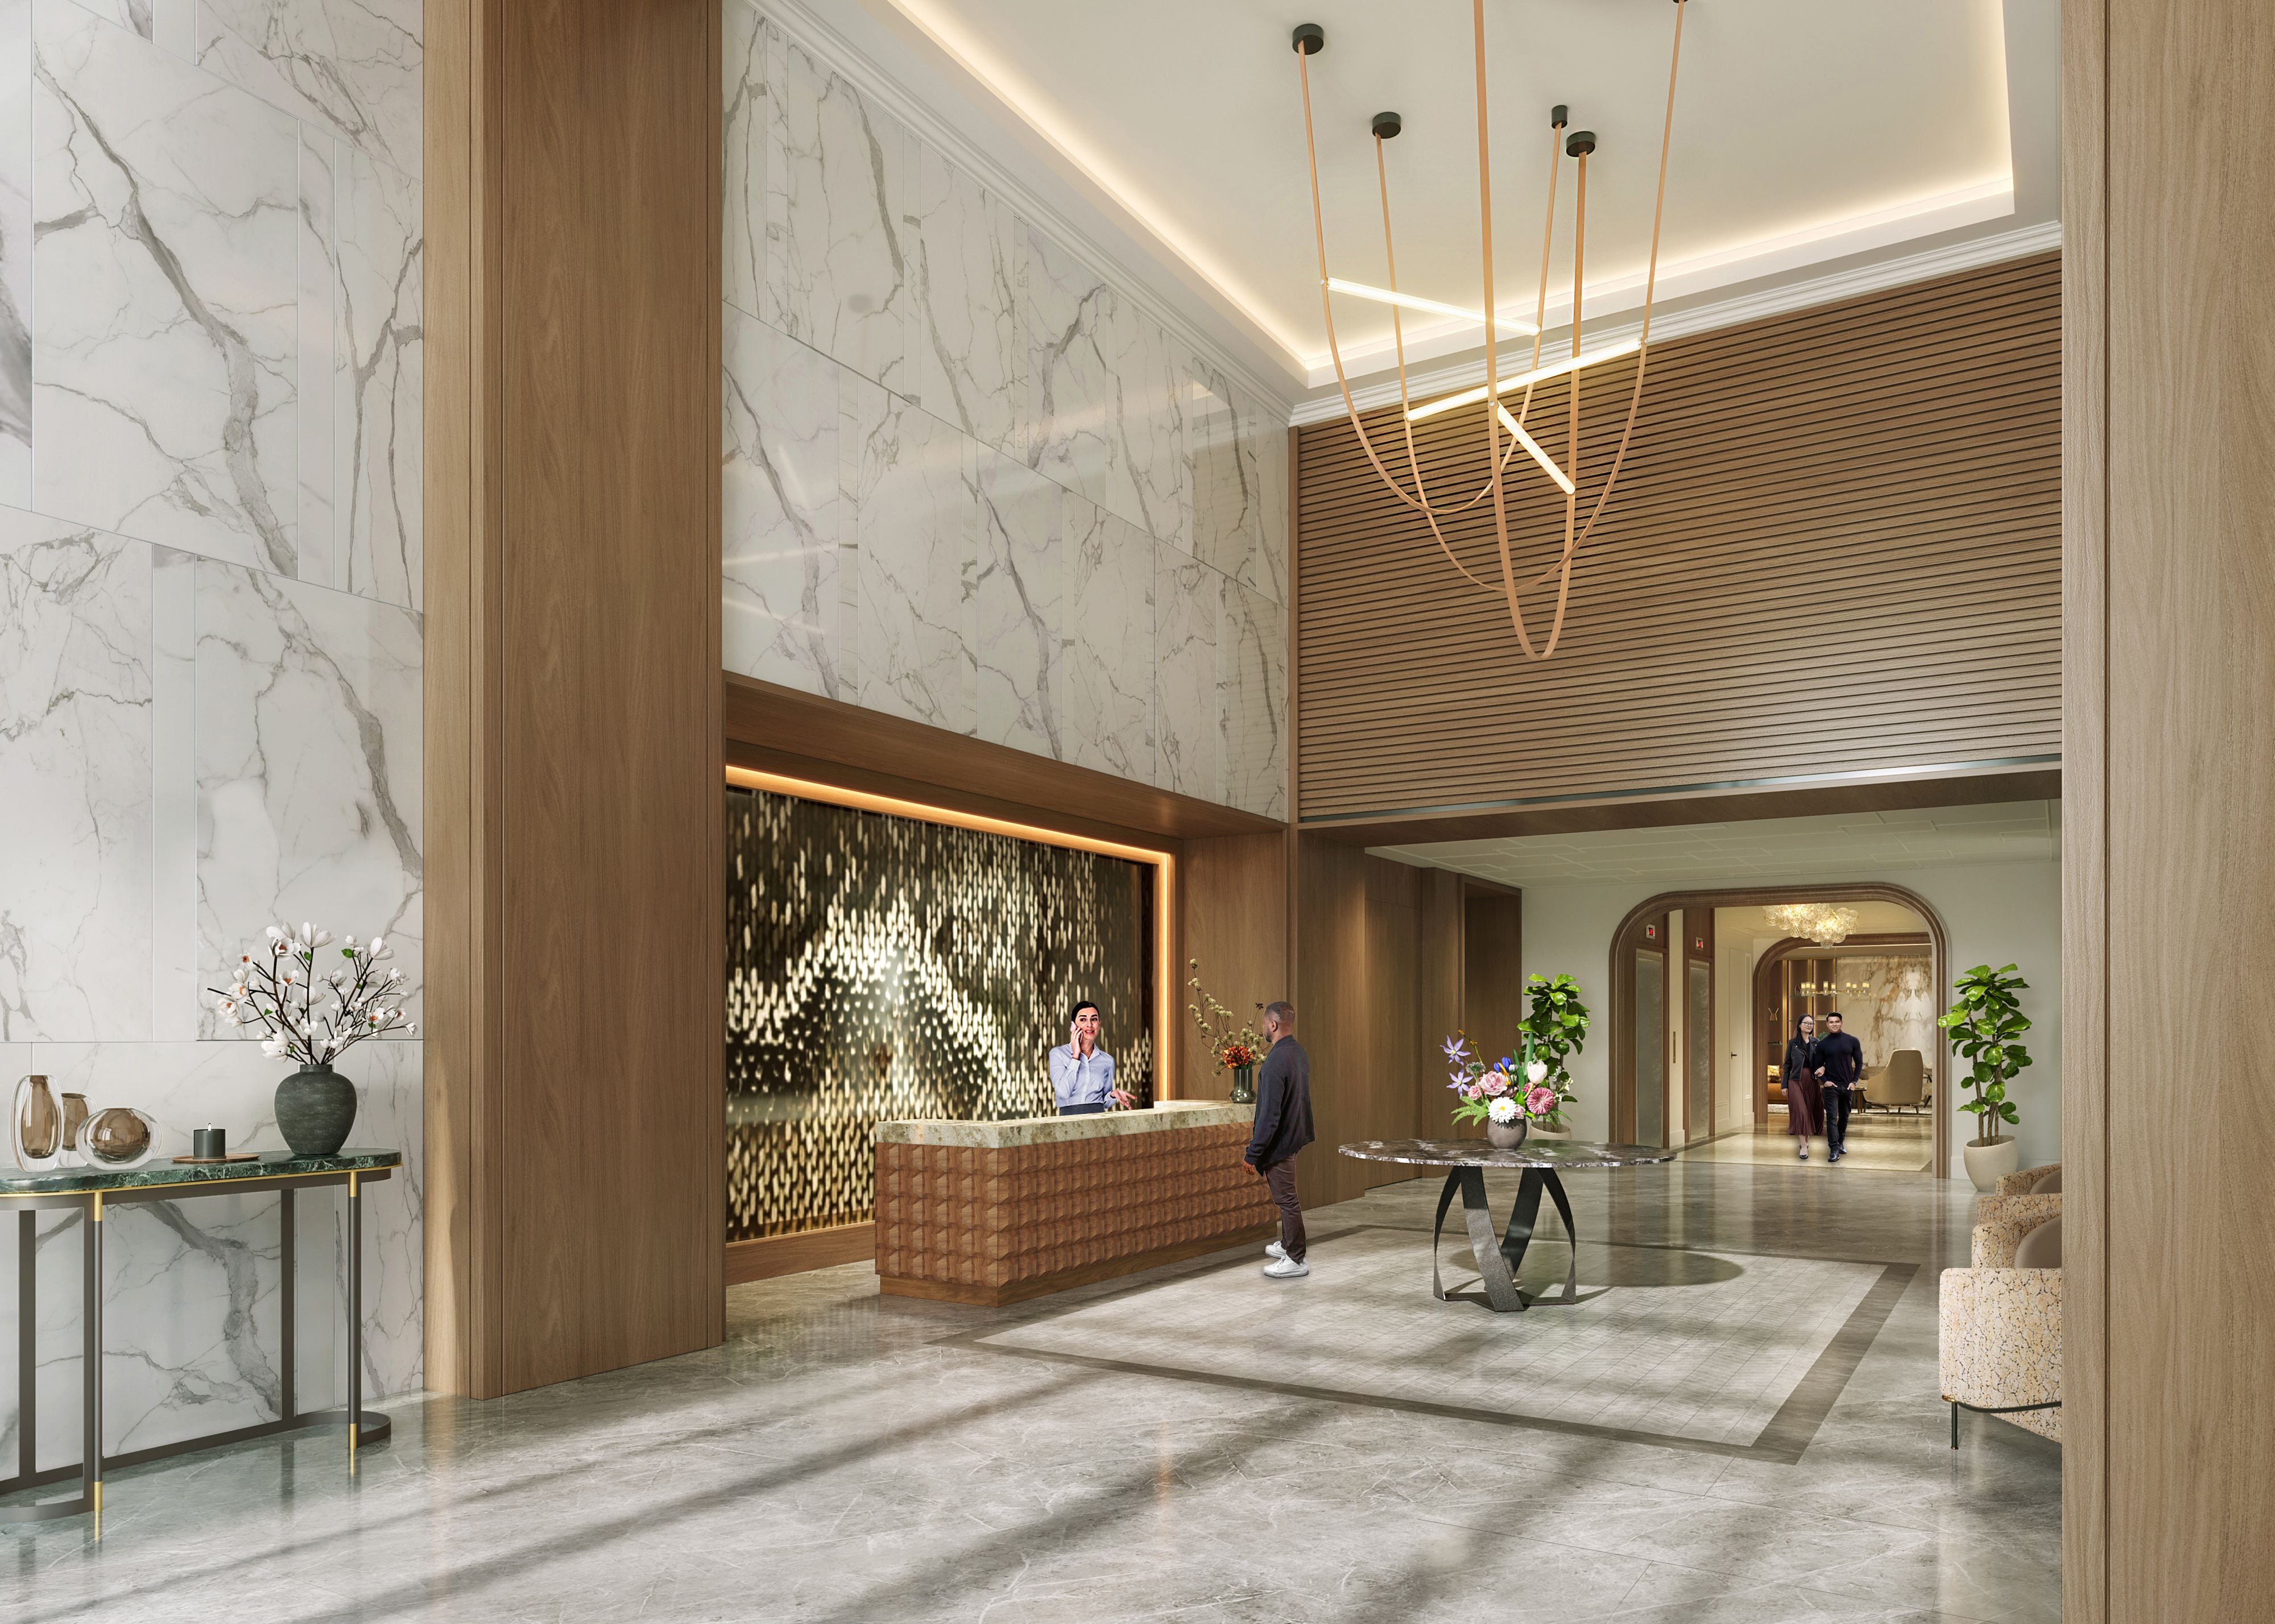 (Hines) Rendering of the new lobby/reception area for South Temple Tower, part of an office-to-residential remake of 136 E. South Temple in Salt Lake City.